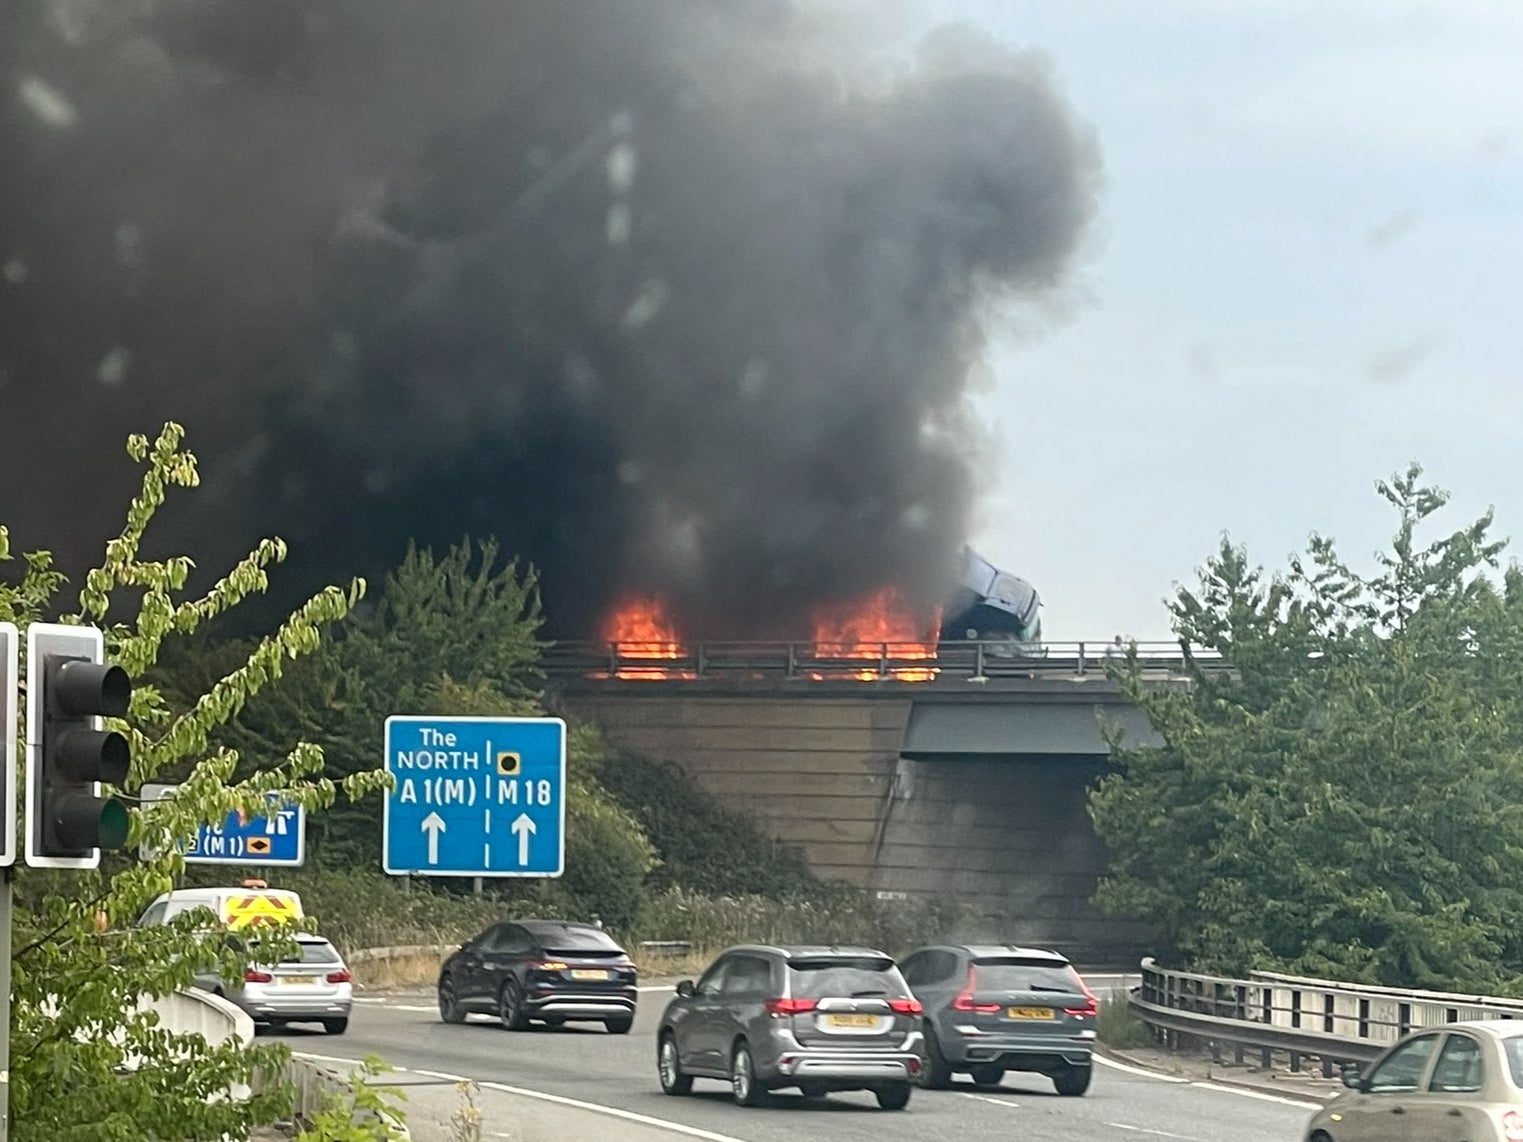 A lorry caught fire along the M18 near Doncaster